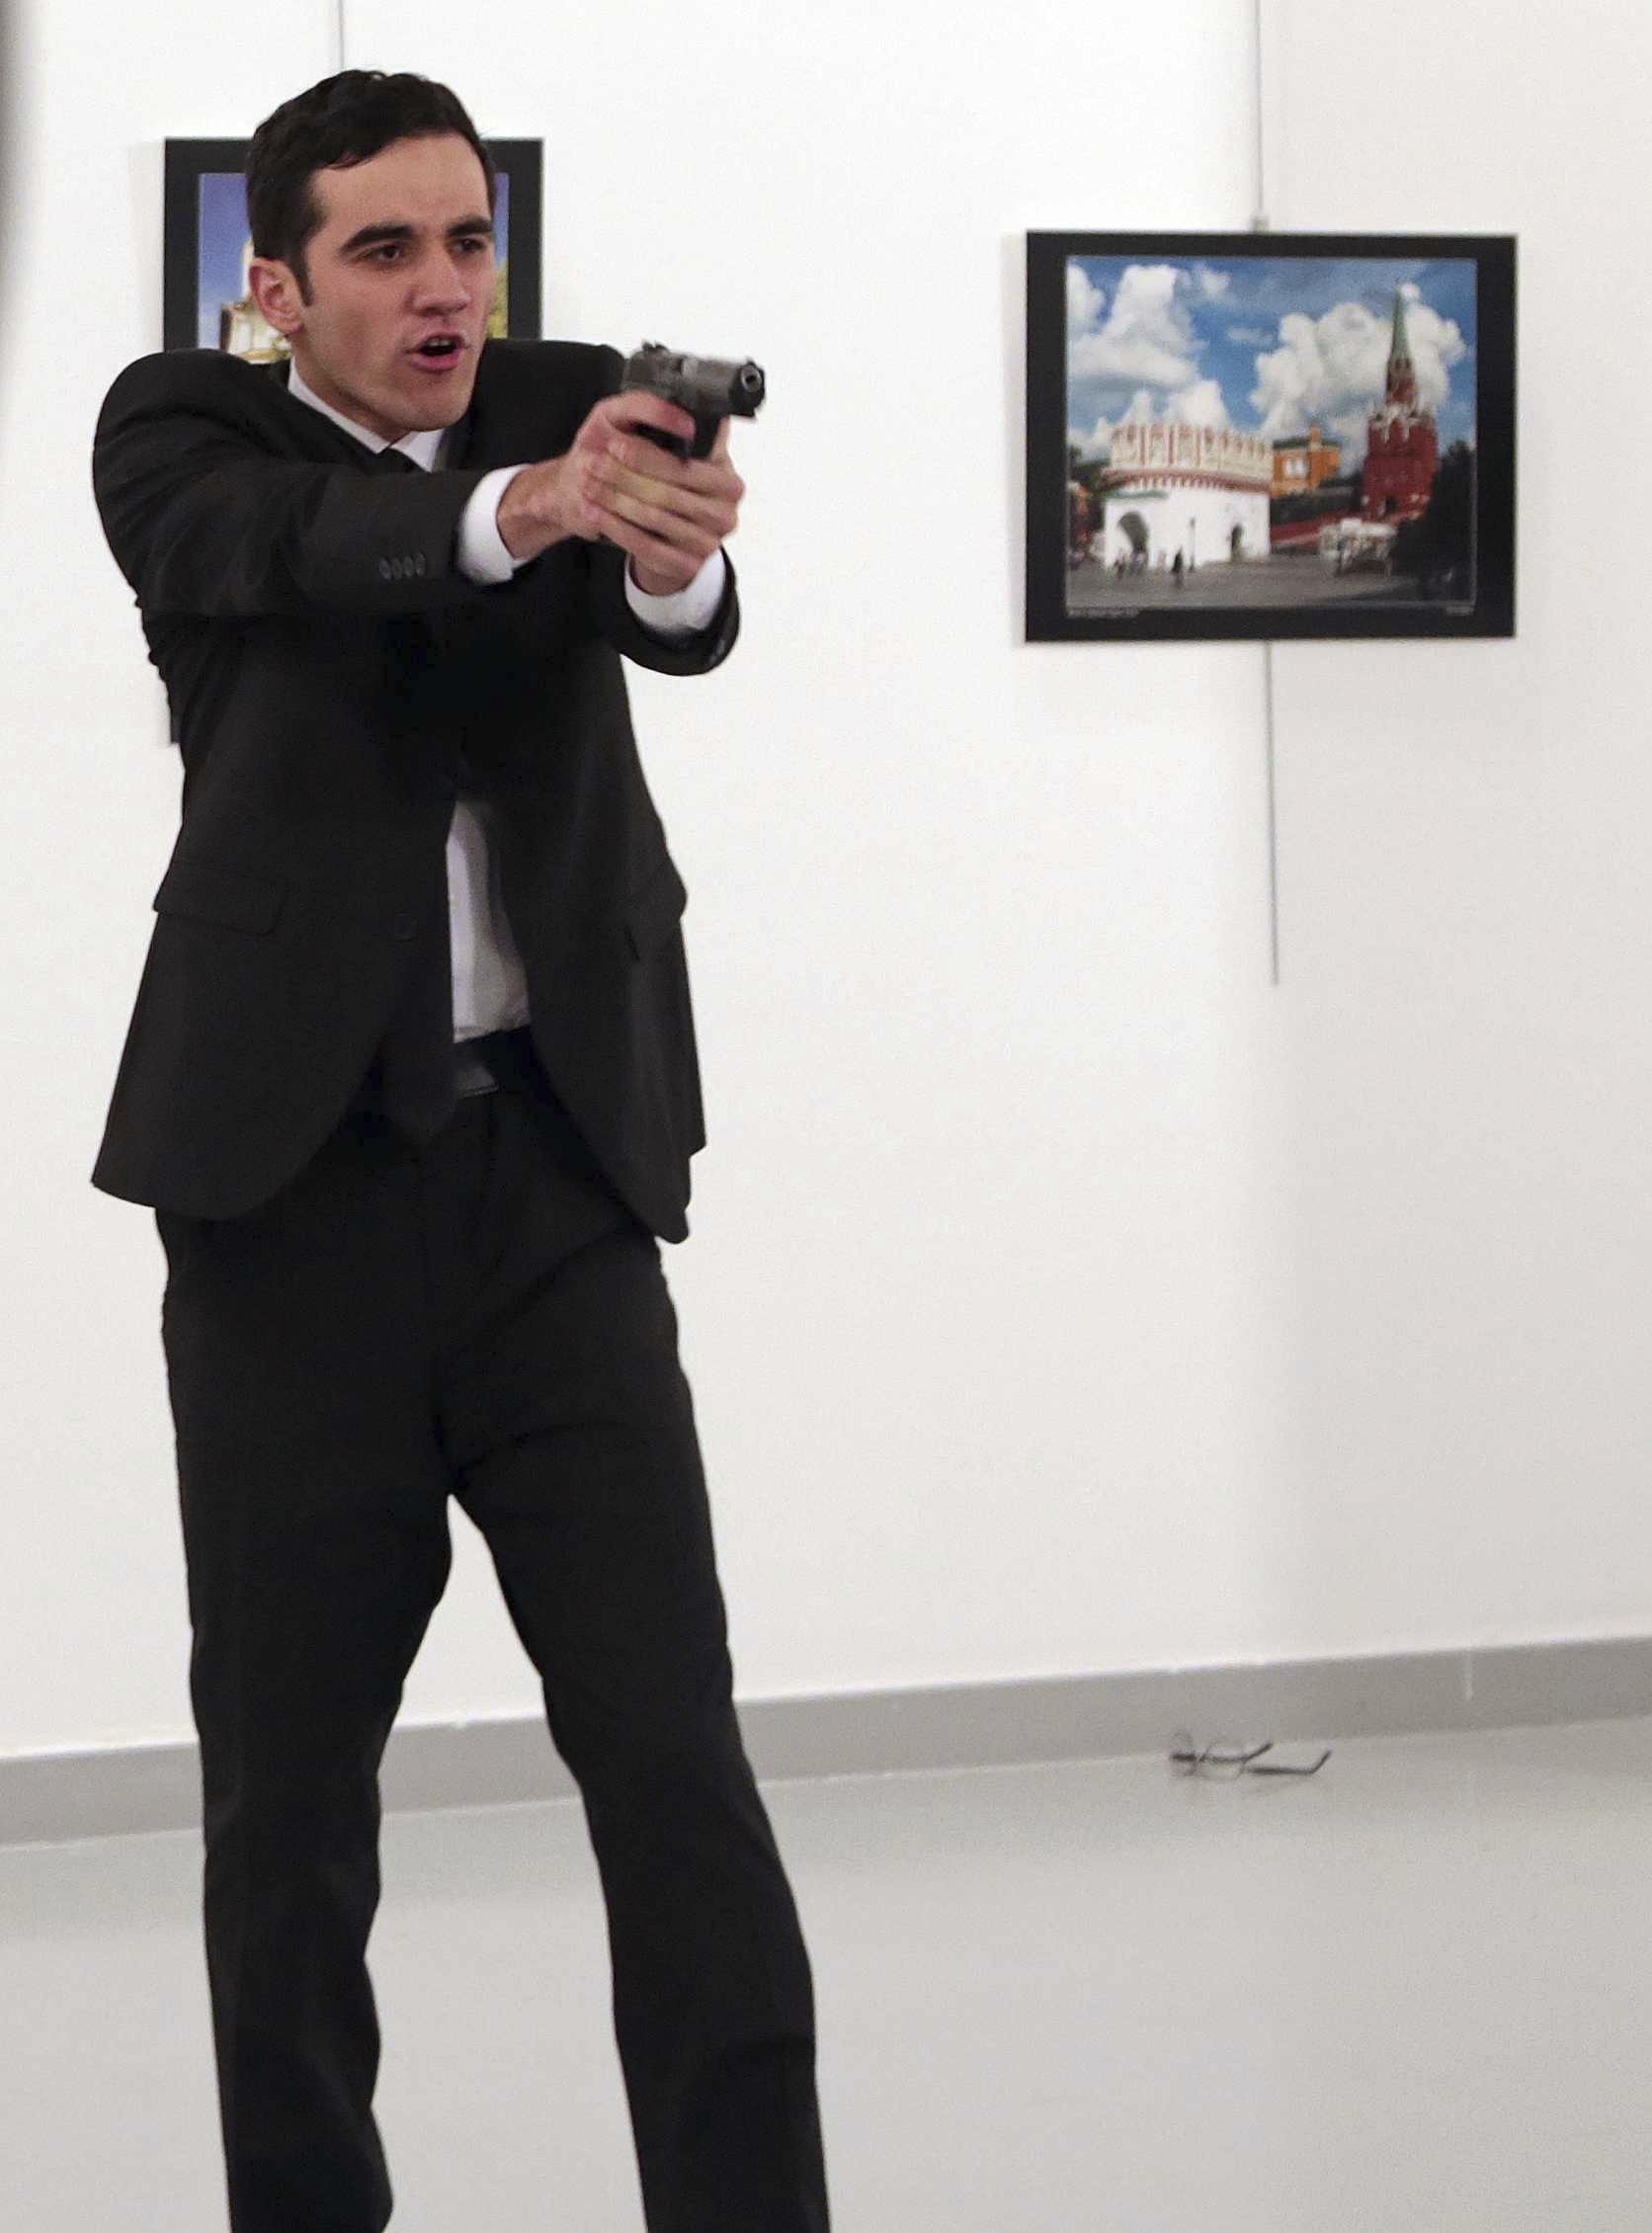 An unnamed gunman points his gun, after shooting the Russian Ambassador to Turkey, Andrei Karlov, at a photo gallery in Ankara, Turkey, Monday, Dec. 19, 2016. A gunman in a suit and tie shouted slogans about Syria's civil war after he killed Russia's ambassador to Turkey in front of stunned onlookers at a photo exhibition in the Turkish capital on Monday, according to an Associated Press photographer who witnessed the shooting. Police later killed the assailant, Turkish station NTV reported. (AP Photo/Burhan Ozbilici)